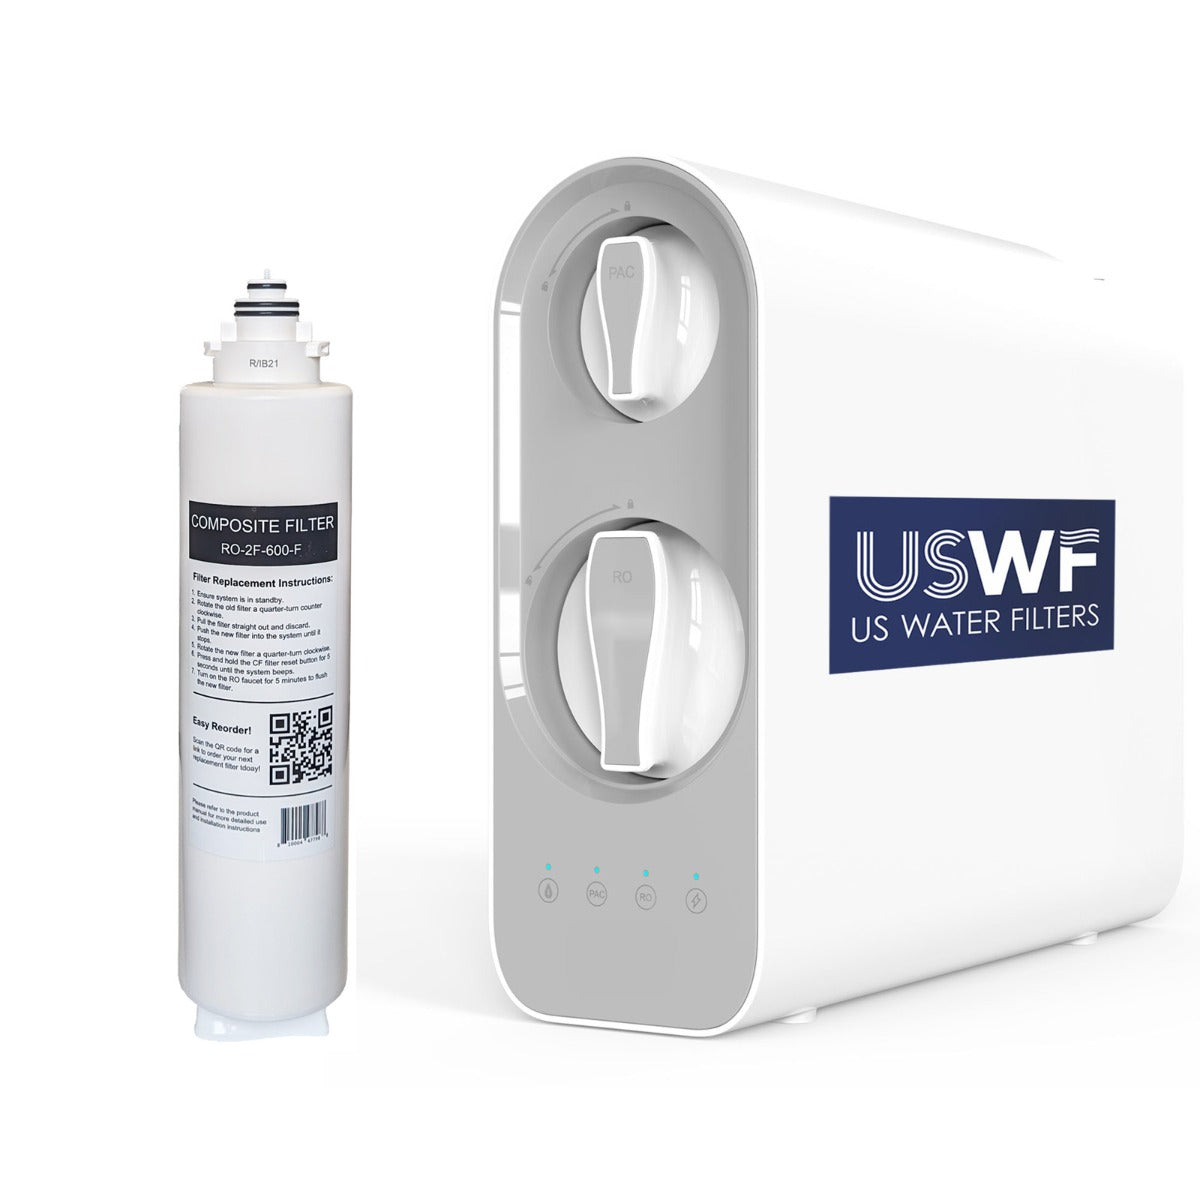 USWF Replacement Composite Prefilter for RO-2F-600 Tankless Reverse Osmosis System